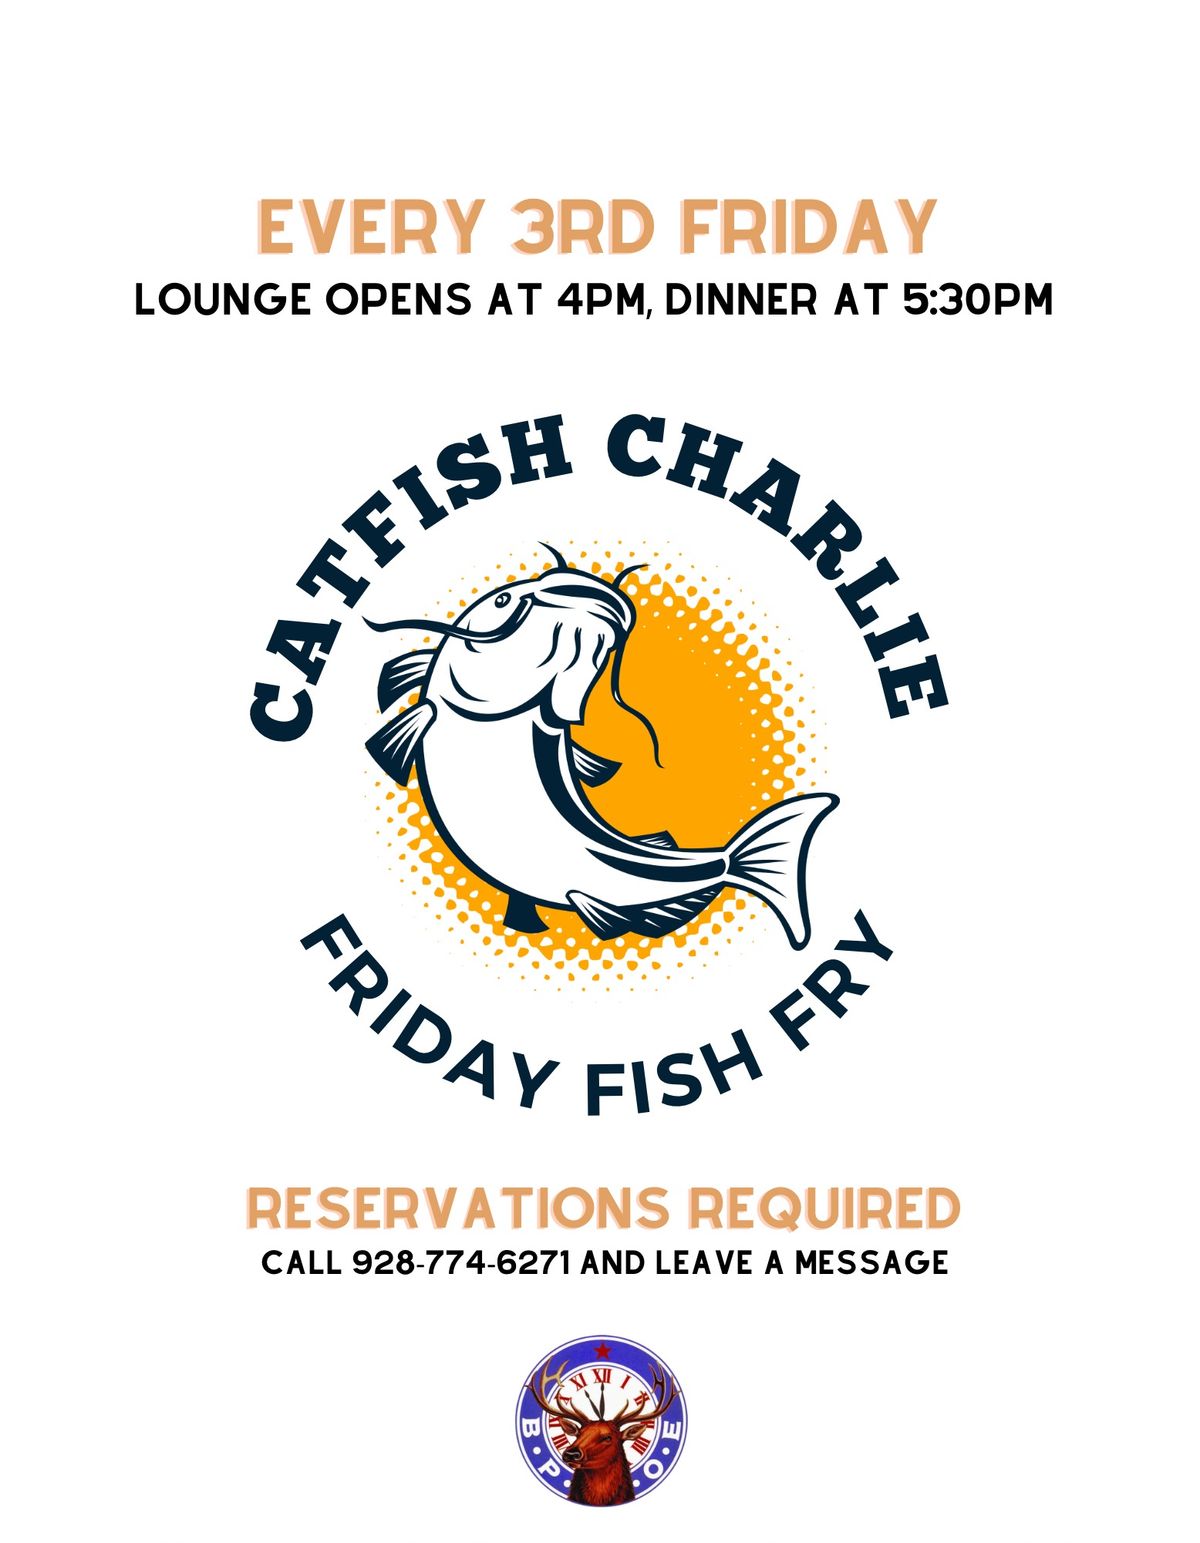 Catfish Charlie Fish Fry Friday -3rd Friday (Open to members and guests, Reservations Required)